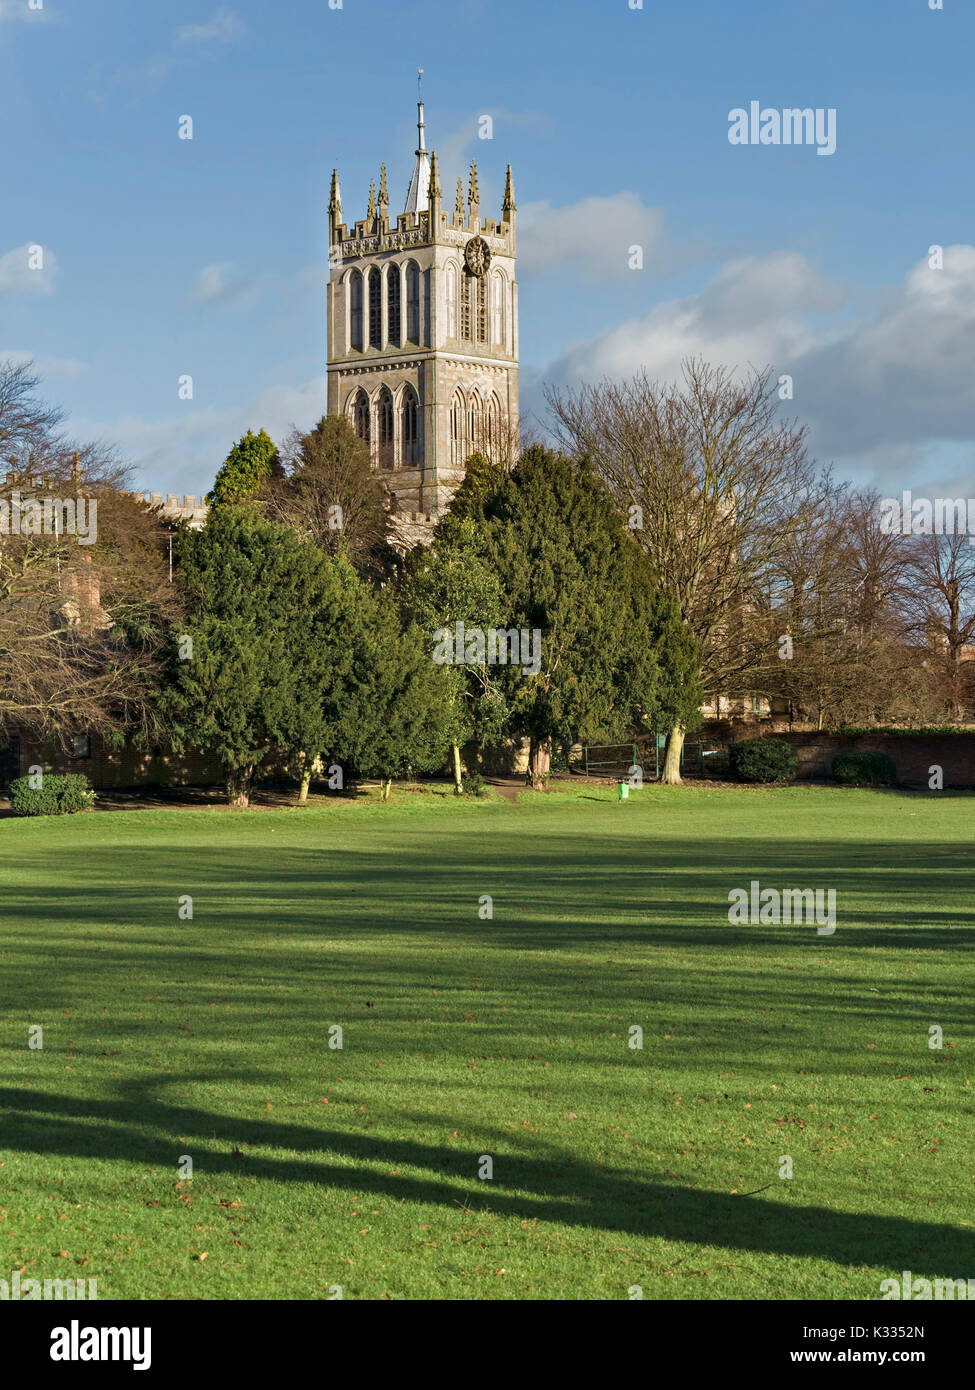 St Mary's Church tower and town park, Melton Mowbray, Leicestershire, England, UK Stock Photo